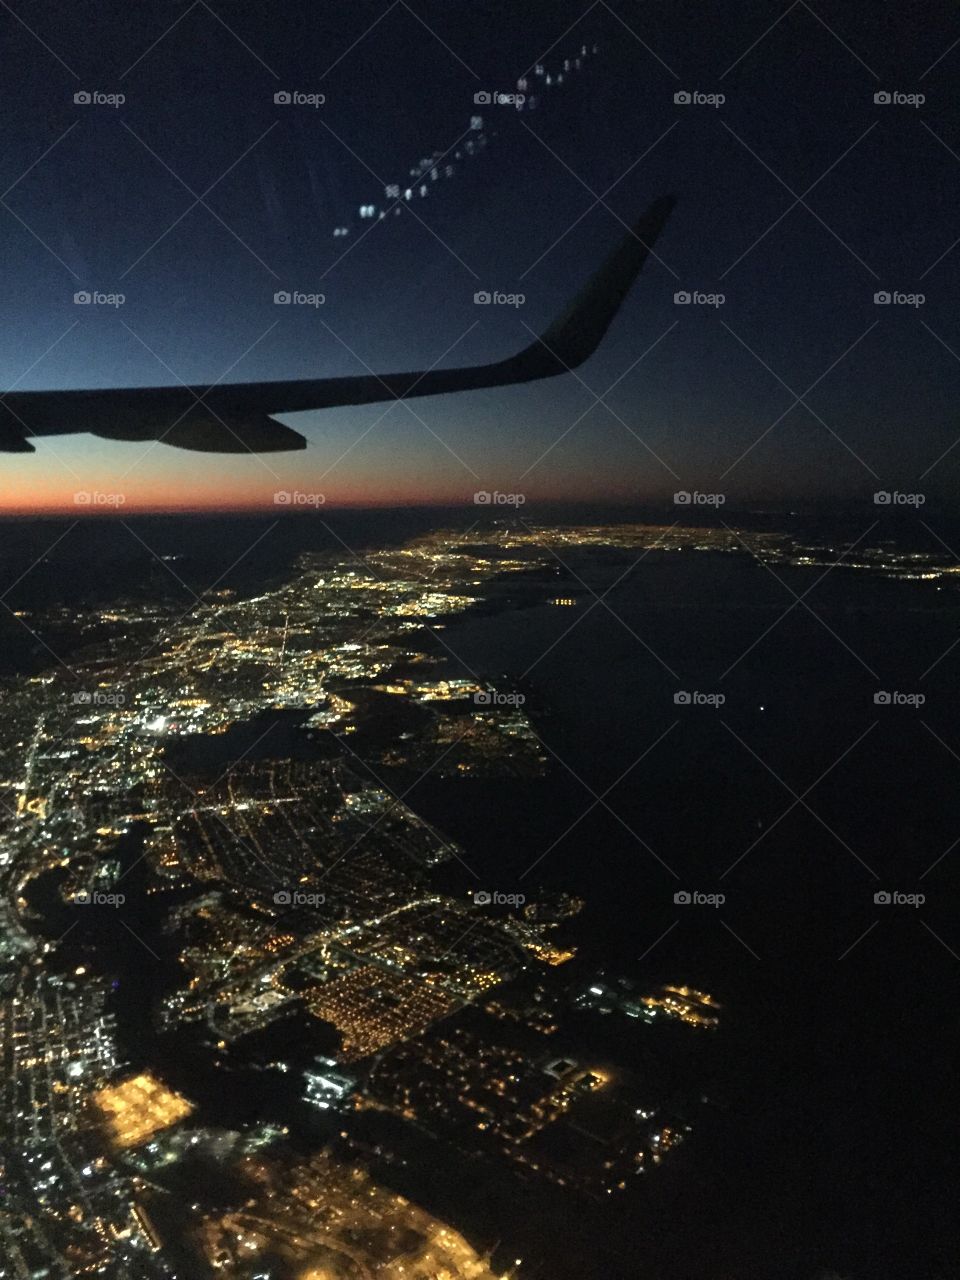 Dusk falls on a city, as seen from a plane. Might be Chicago? The city lights twinkle beneath the deep blue sky 